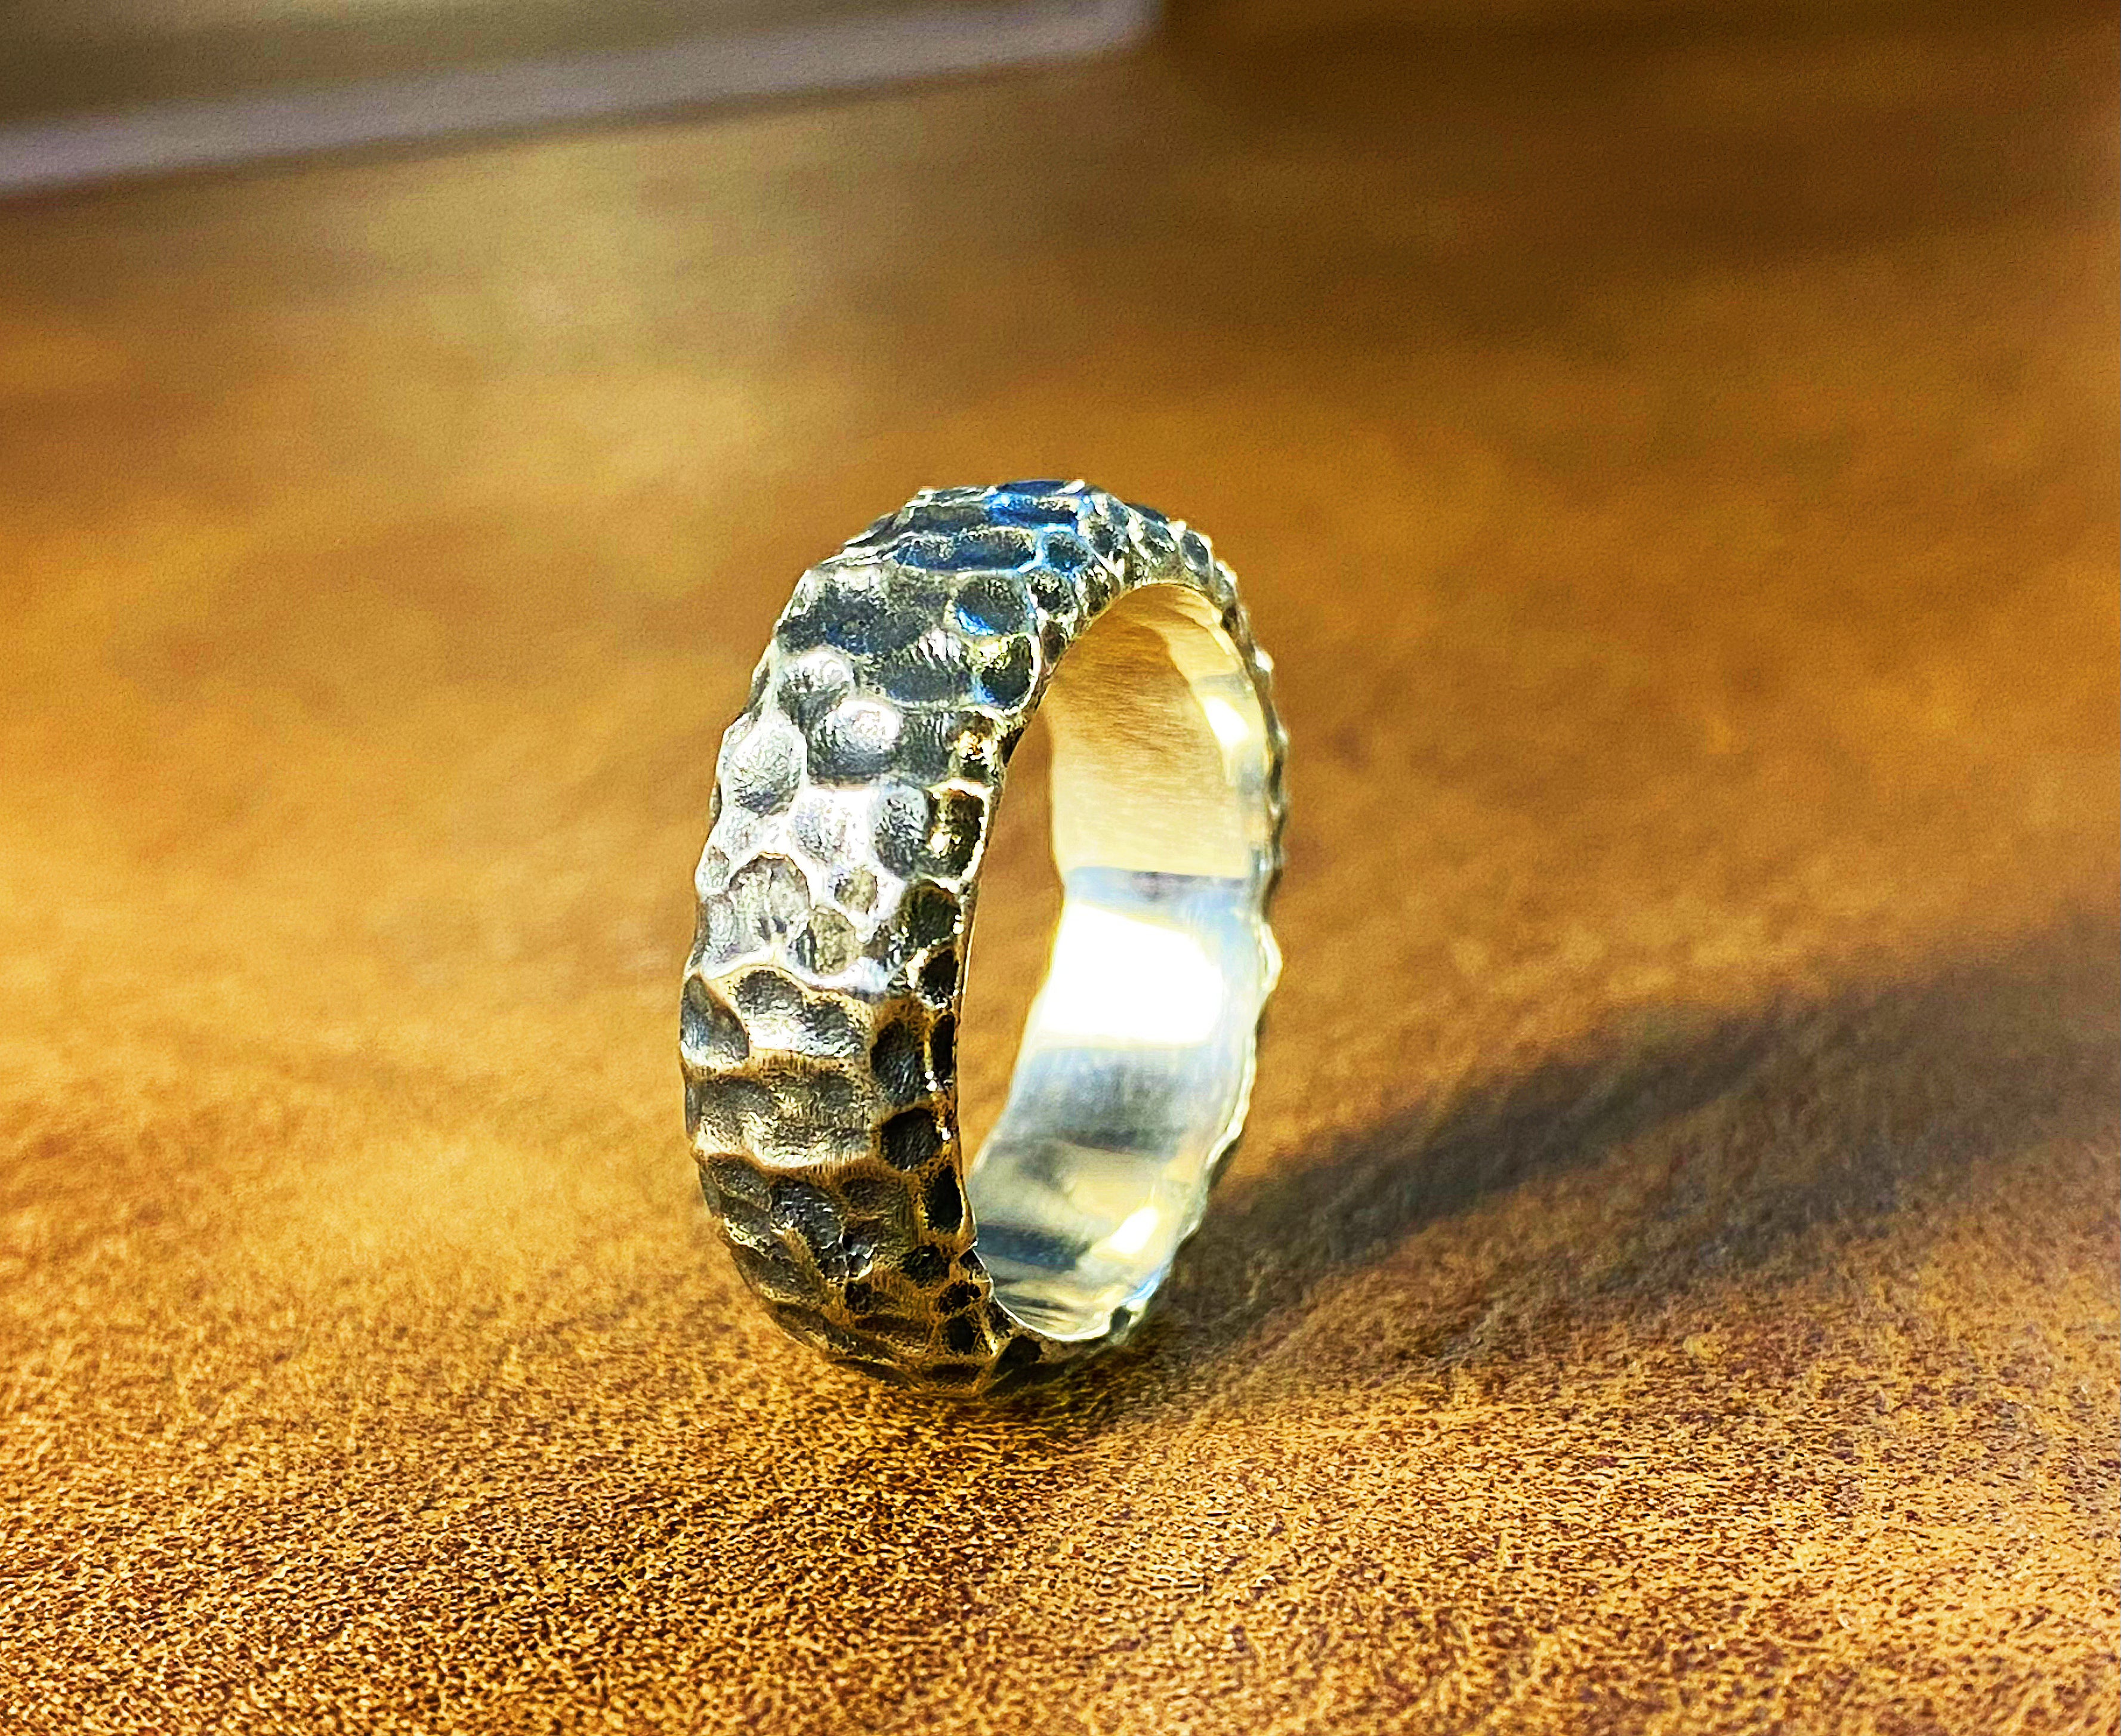 Hammered Silver Ring (Item No. R0005)